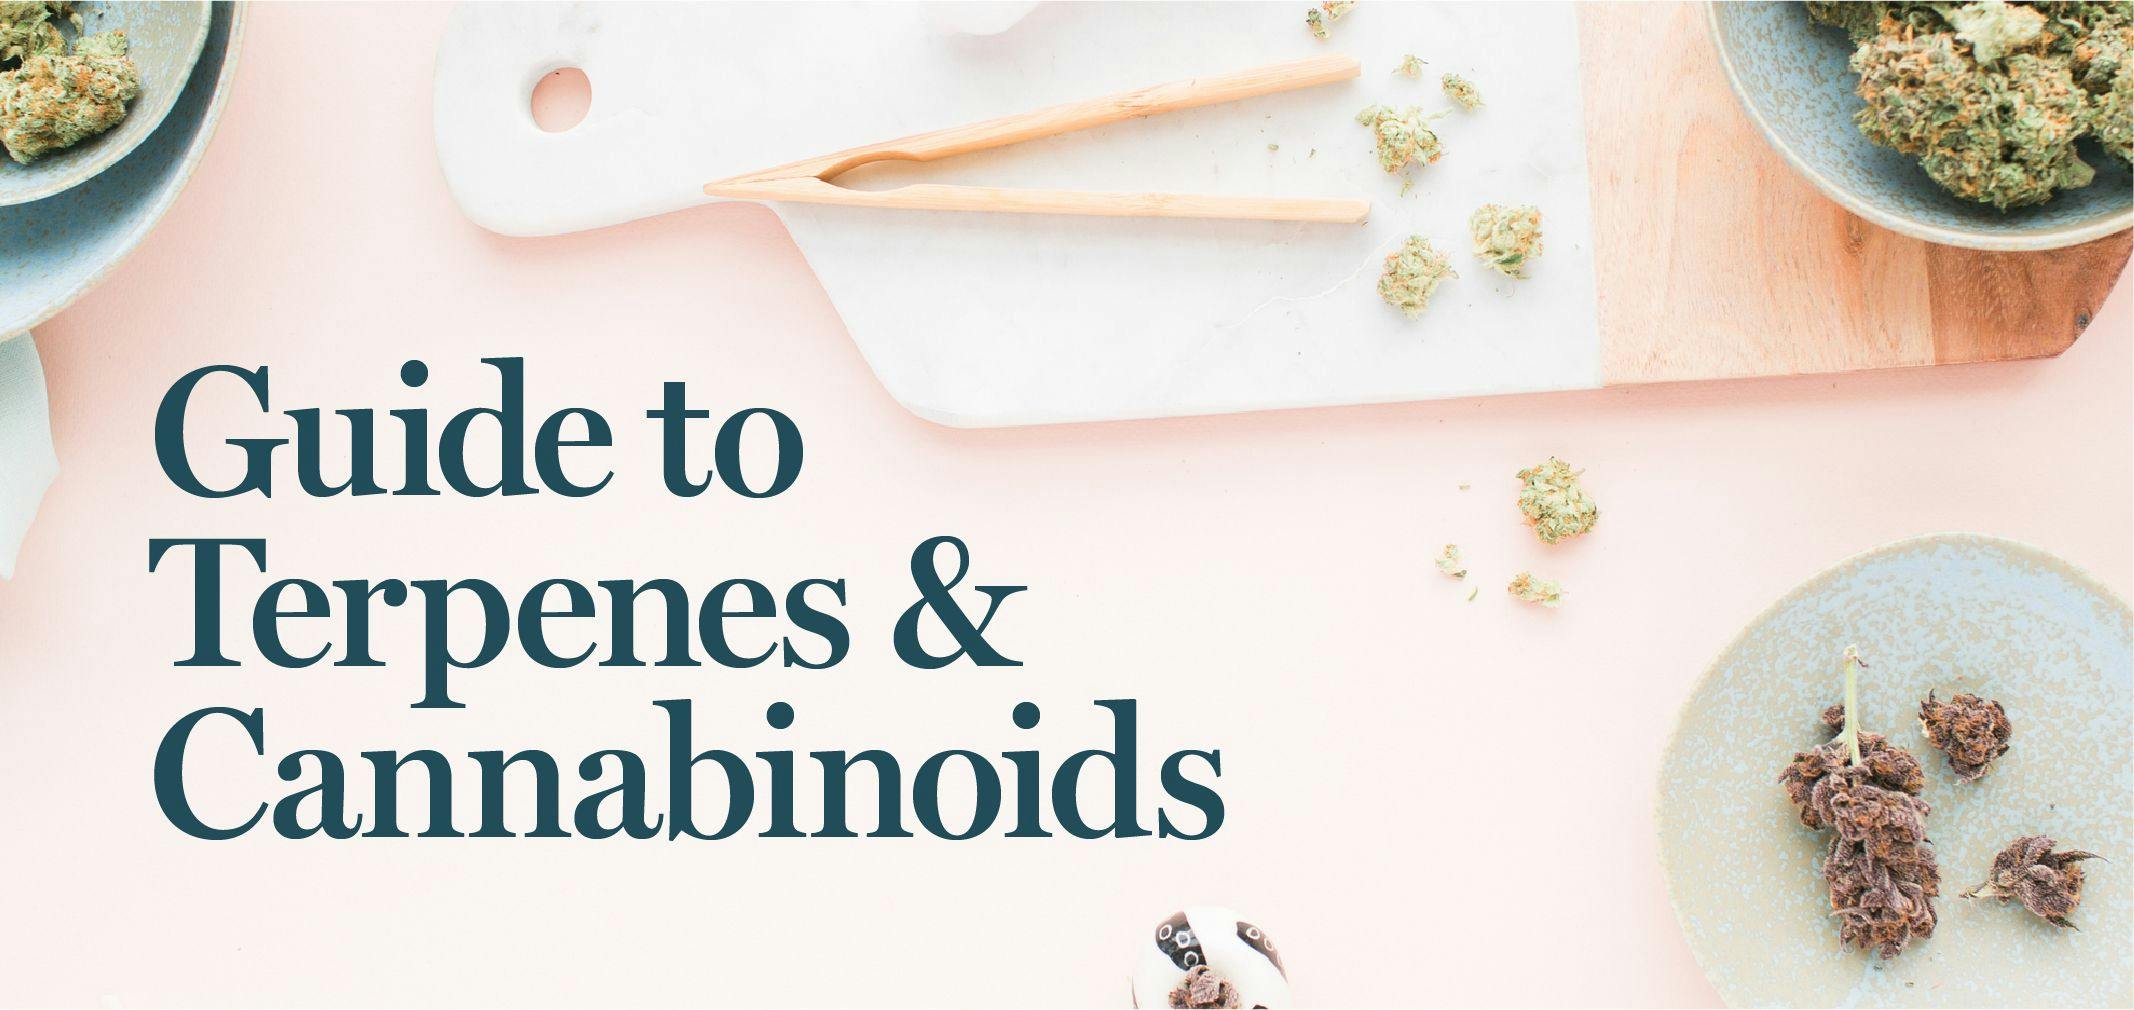 Guide to terpenes and cannabinoids